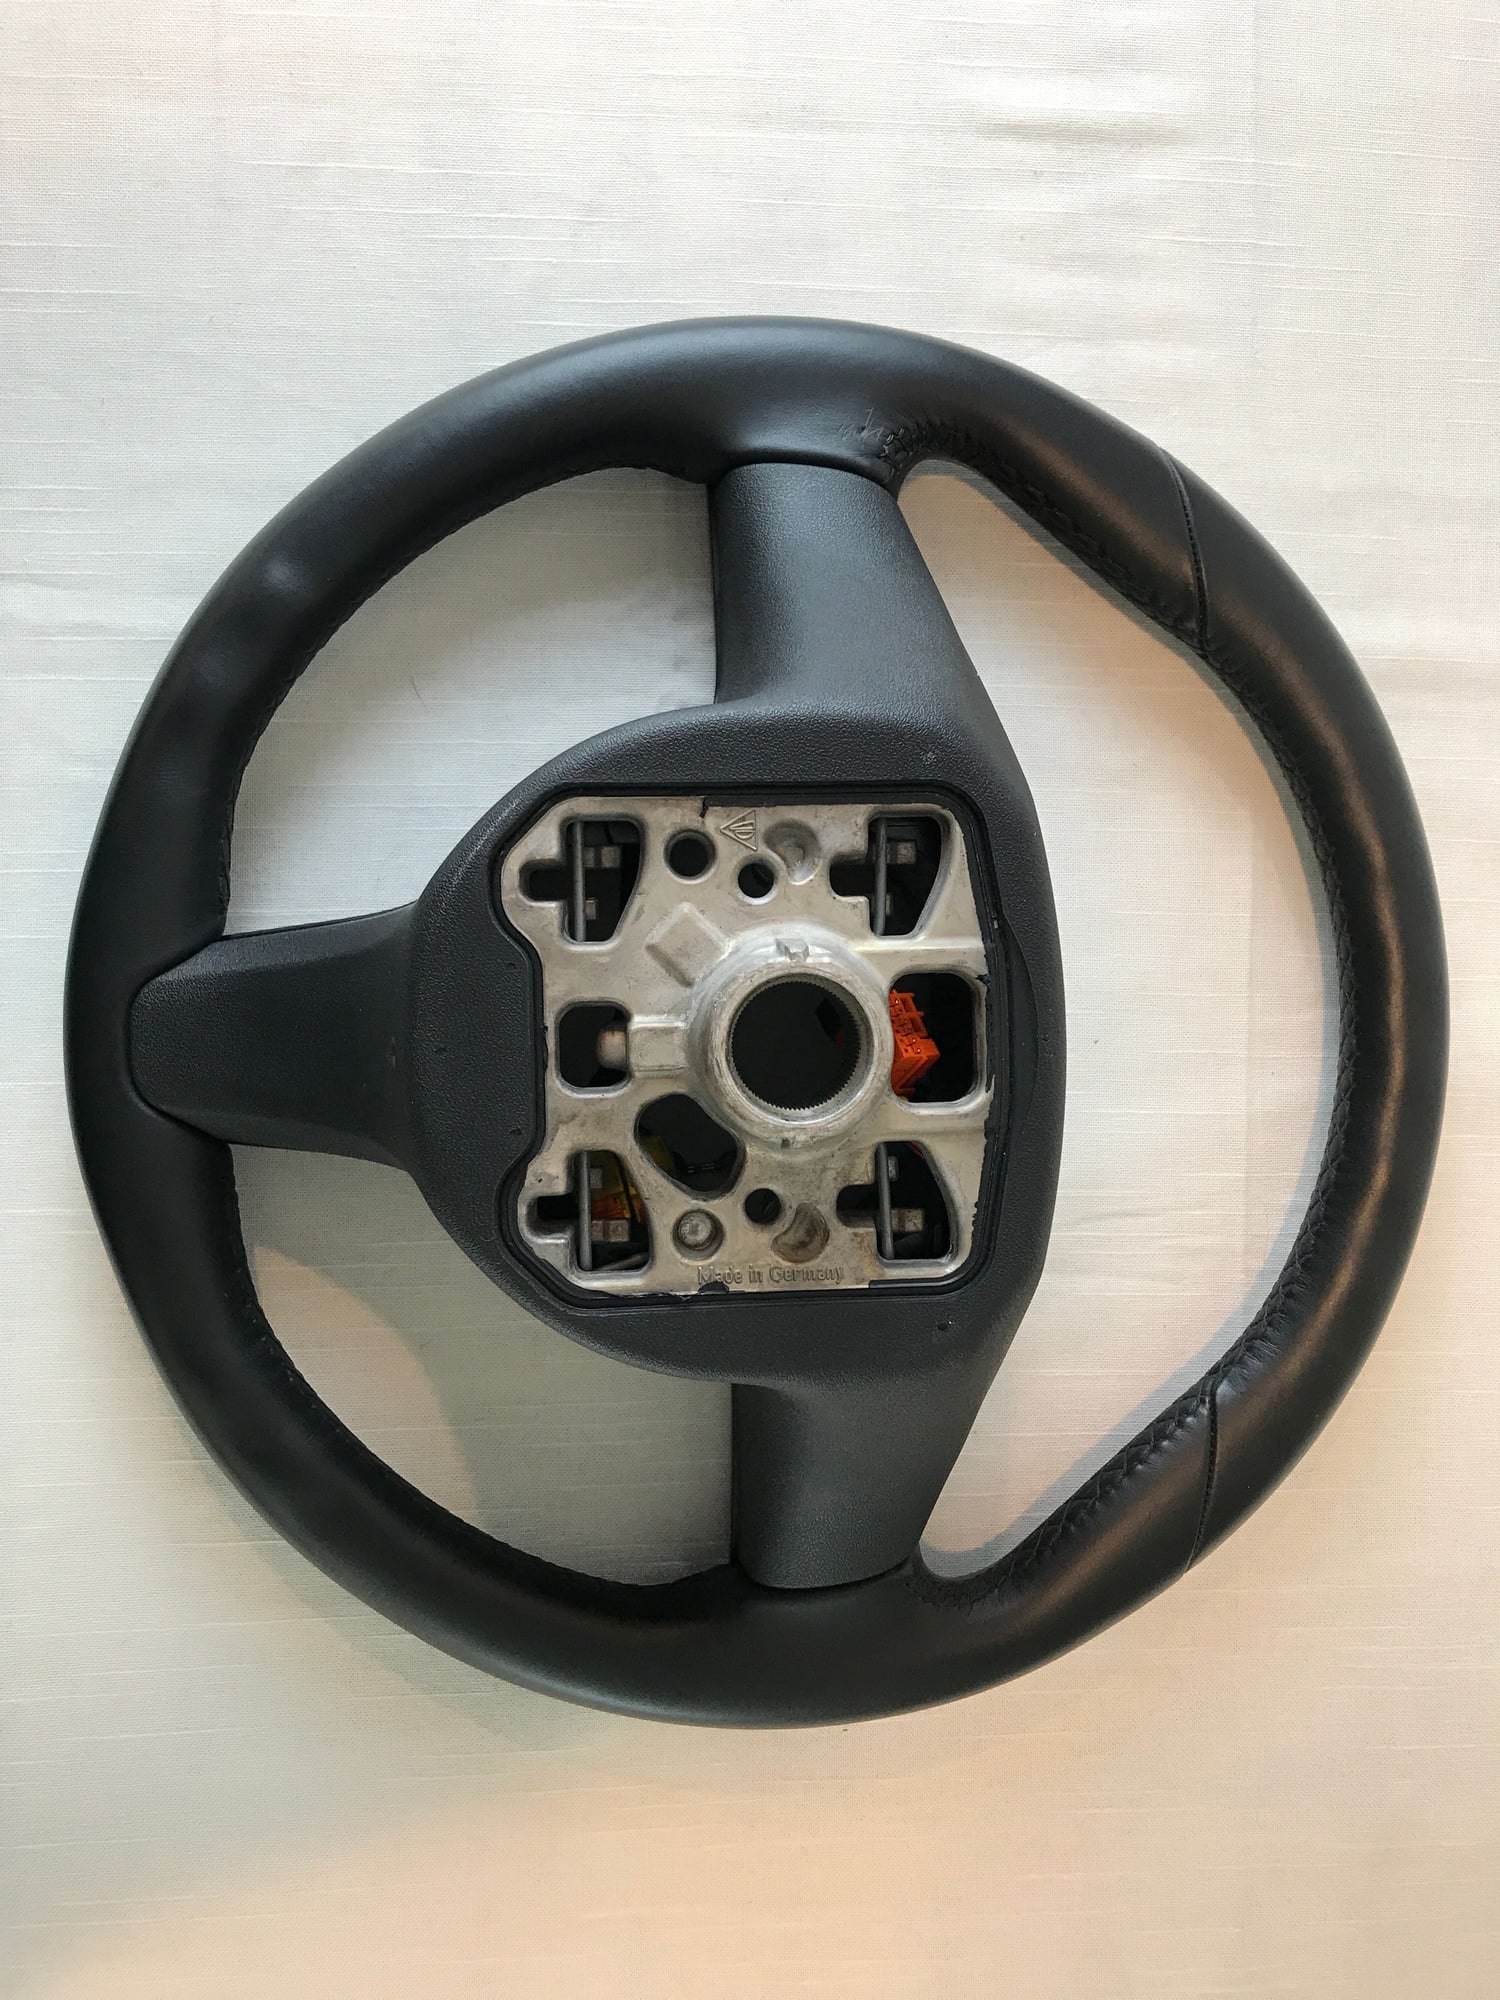 Interior/Upholstery - 997 GT3 RS Steering Wheel Leather - Used - 2009 to 2012 Porsche 911 - 2009 to 2012 Porsche Boxster - 2009 to 2012 Porsche Cayman - Mountainside, NJ 07092, United States